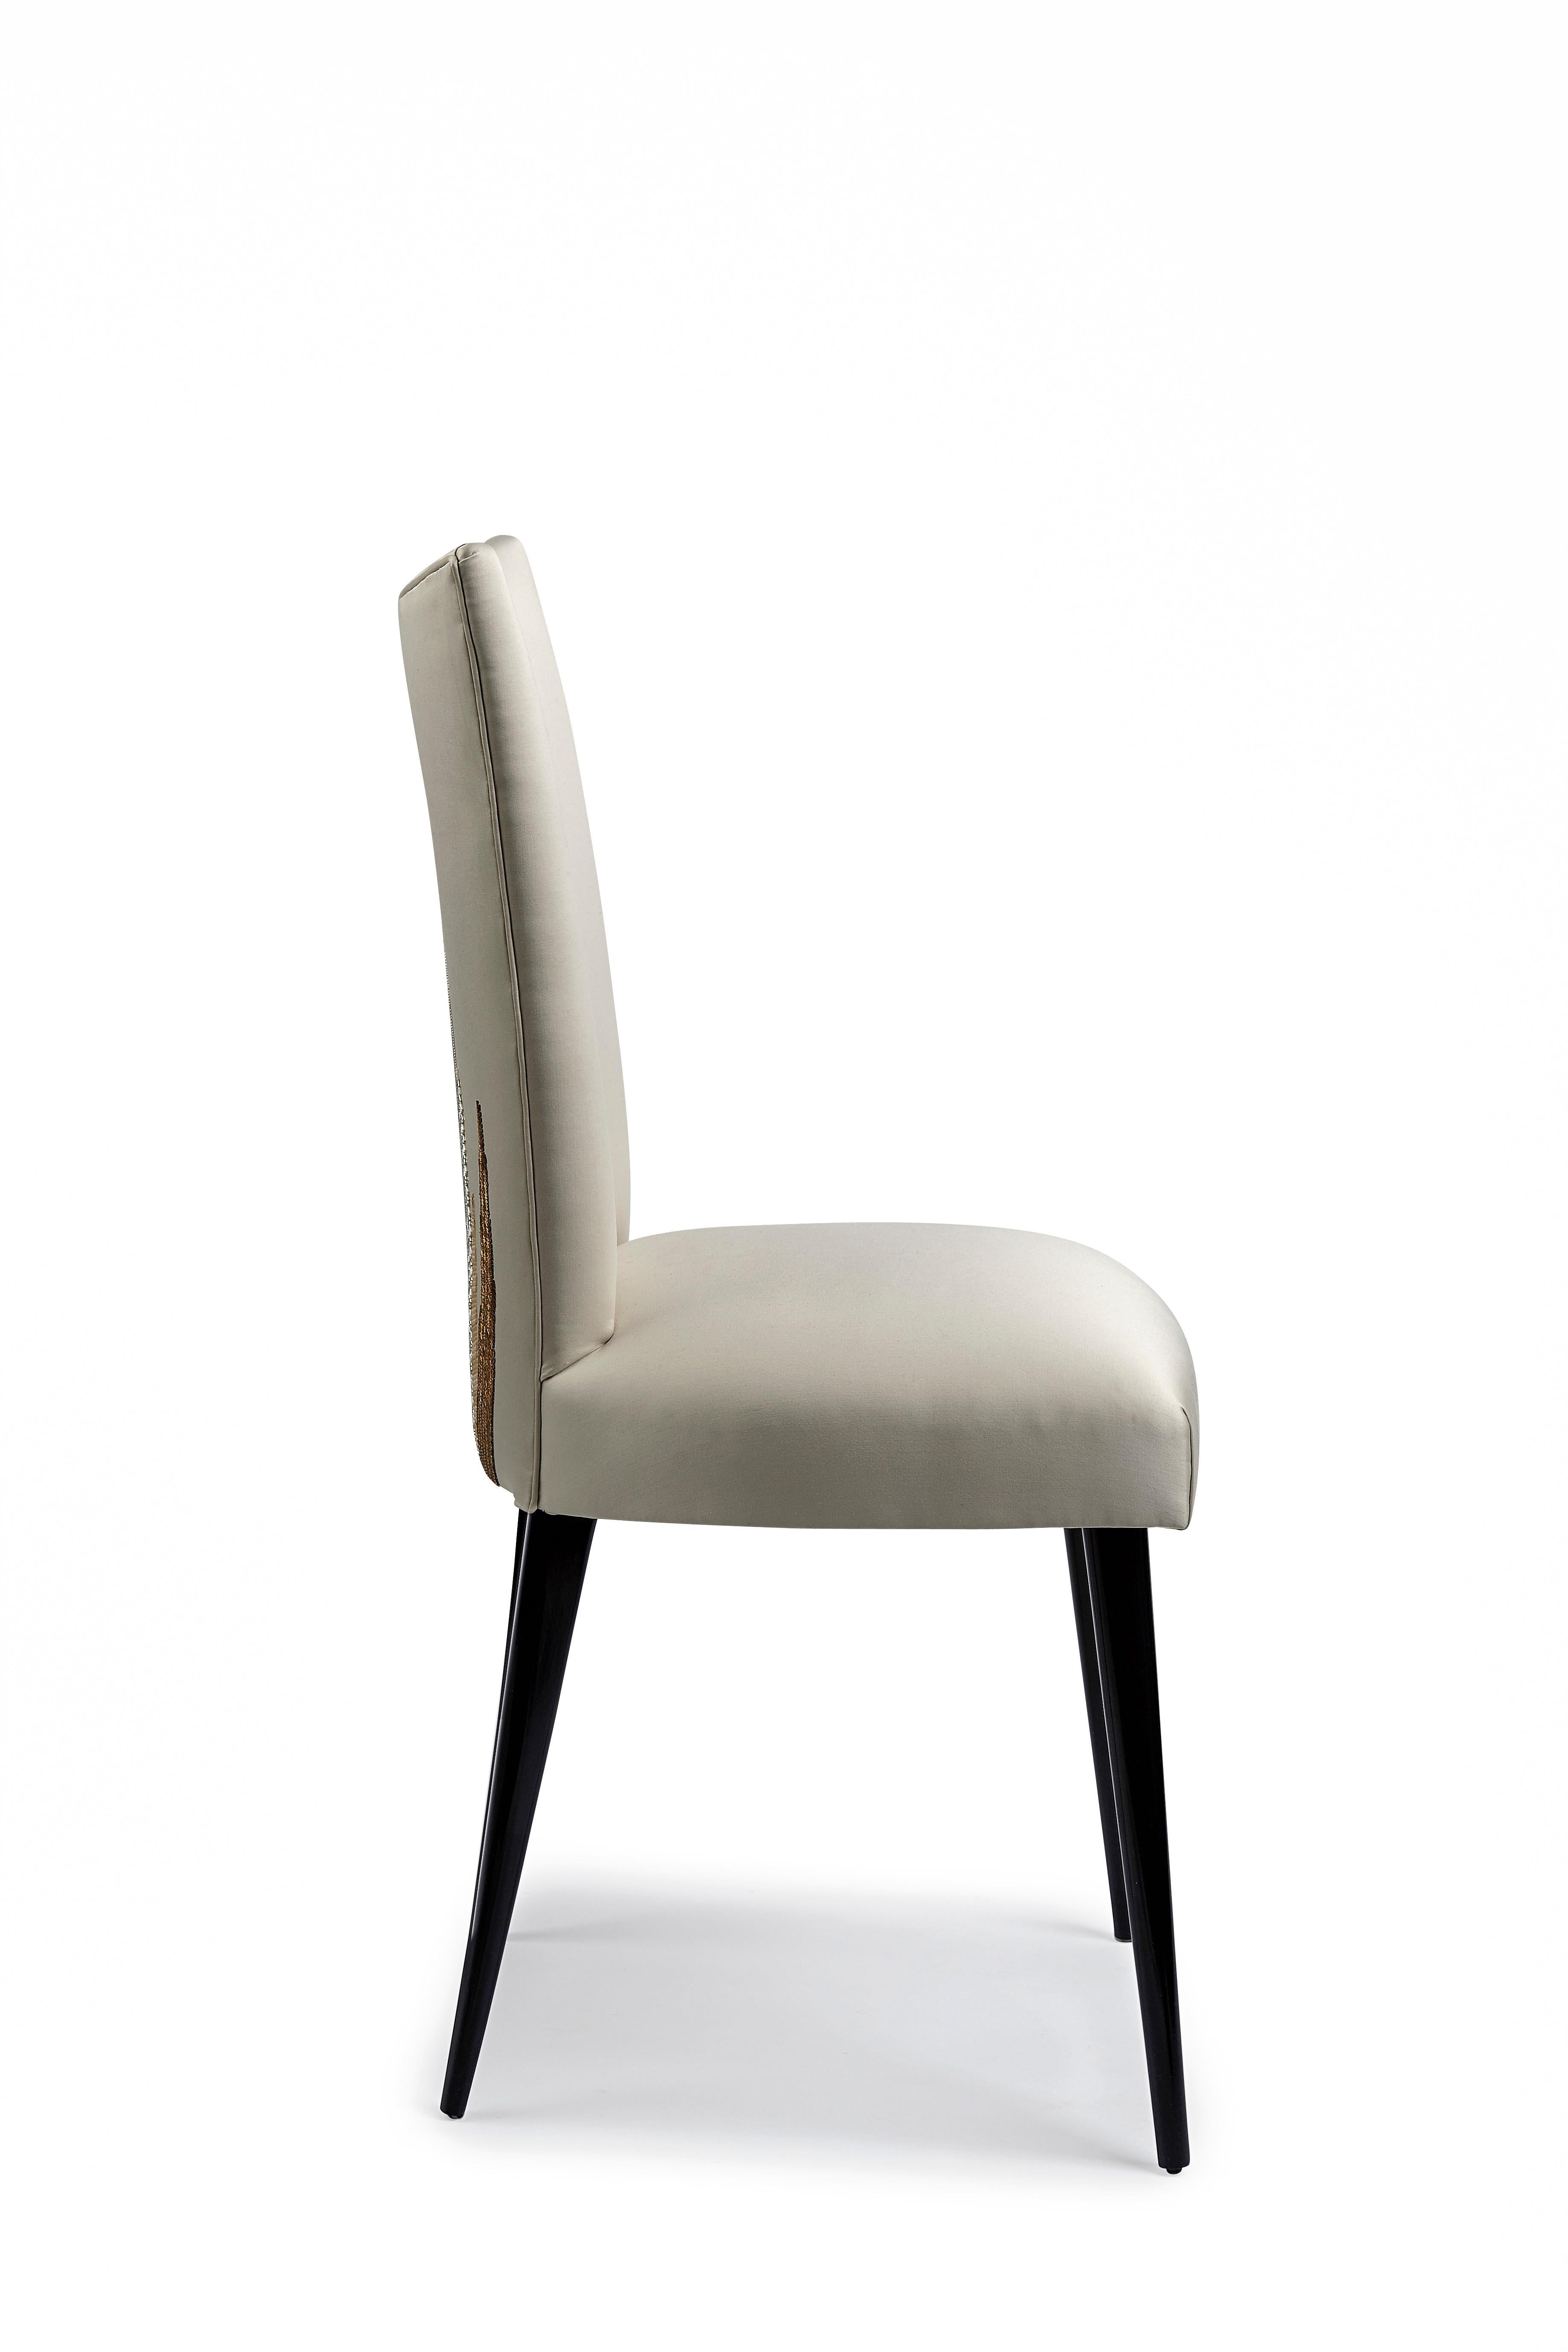 Aiveen Daly Agave Stiletto Chair  In New Condition For Sale In London, GB